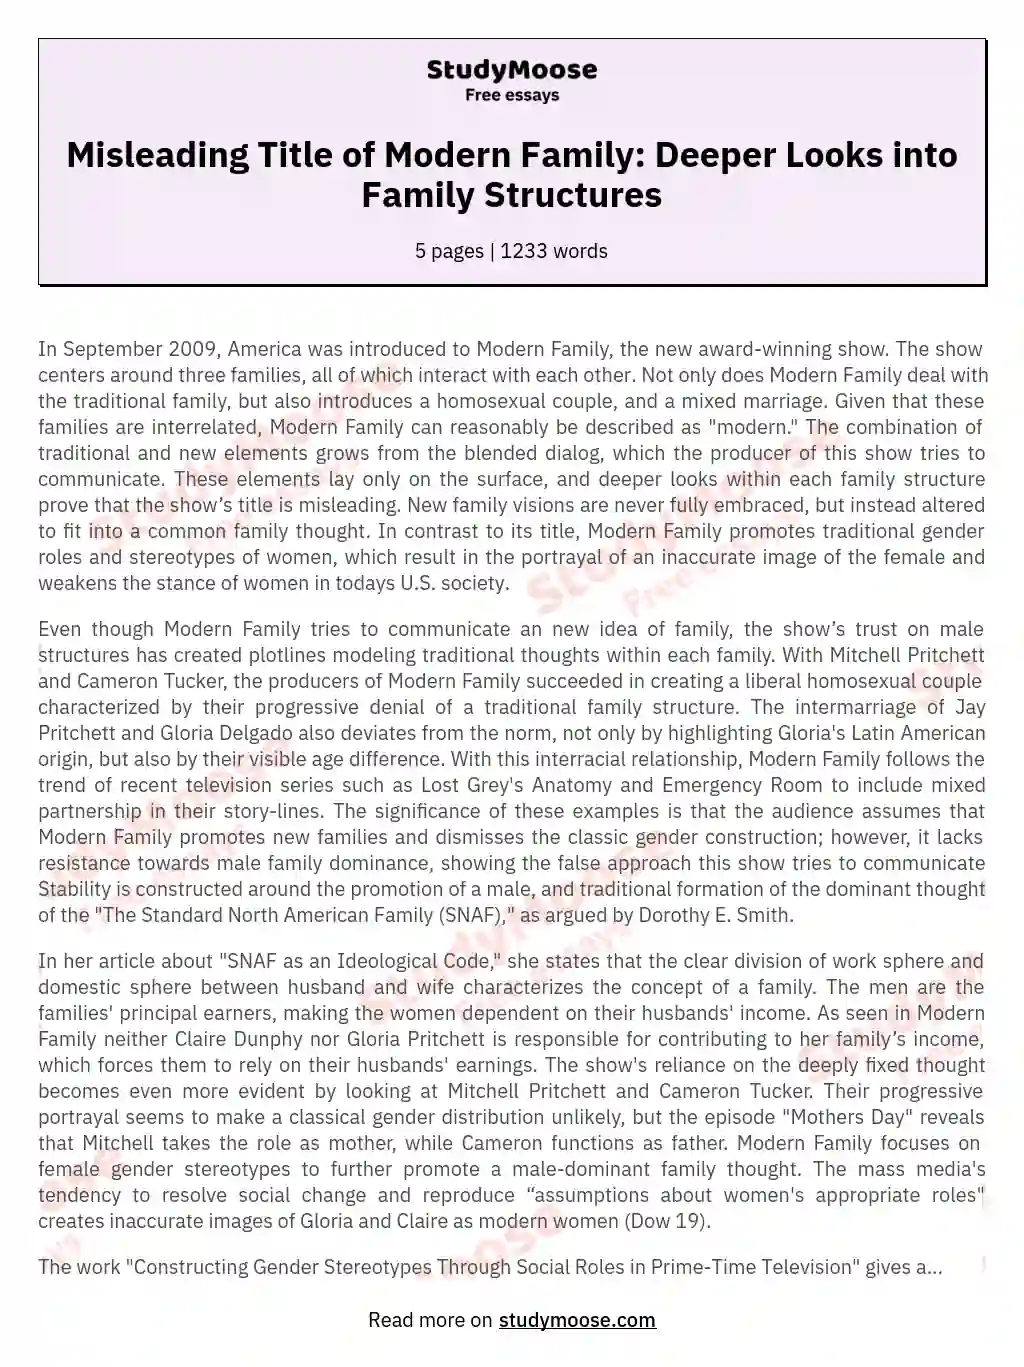 Misleading Title of Modern Family: Deeper Looks into Family Structures essay